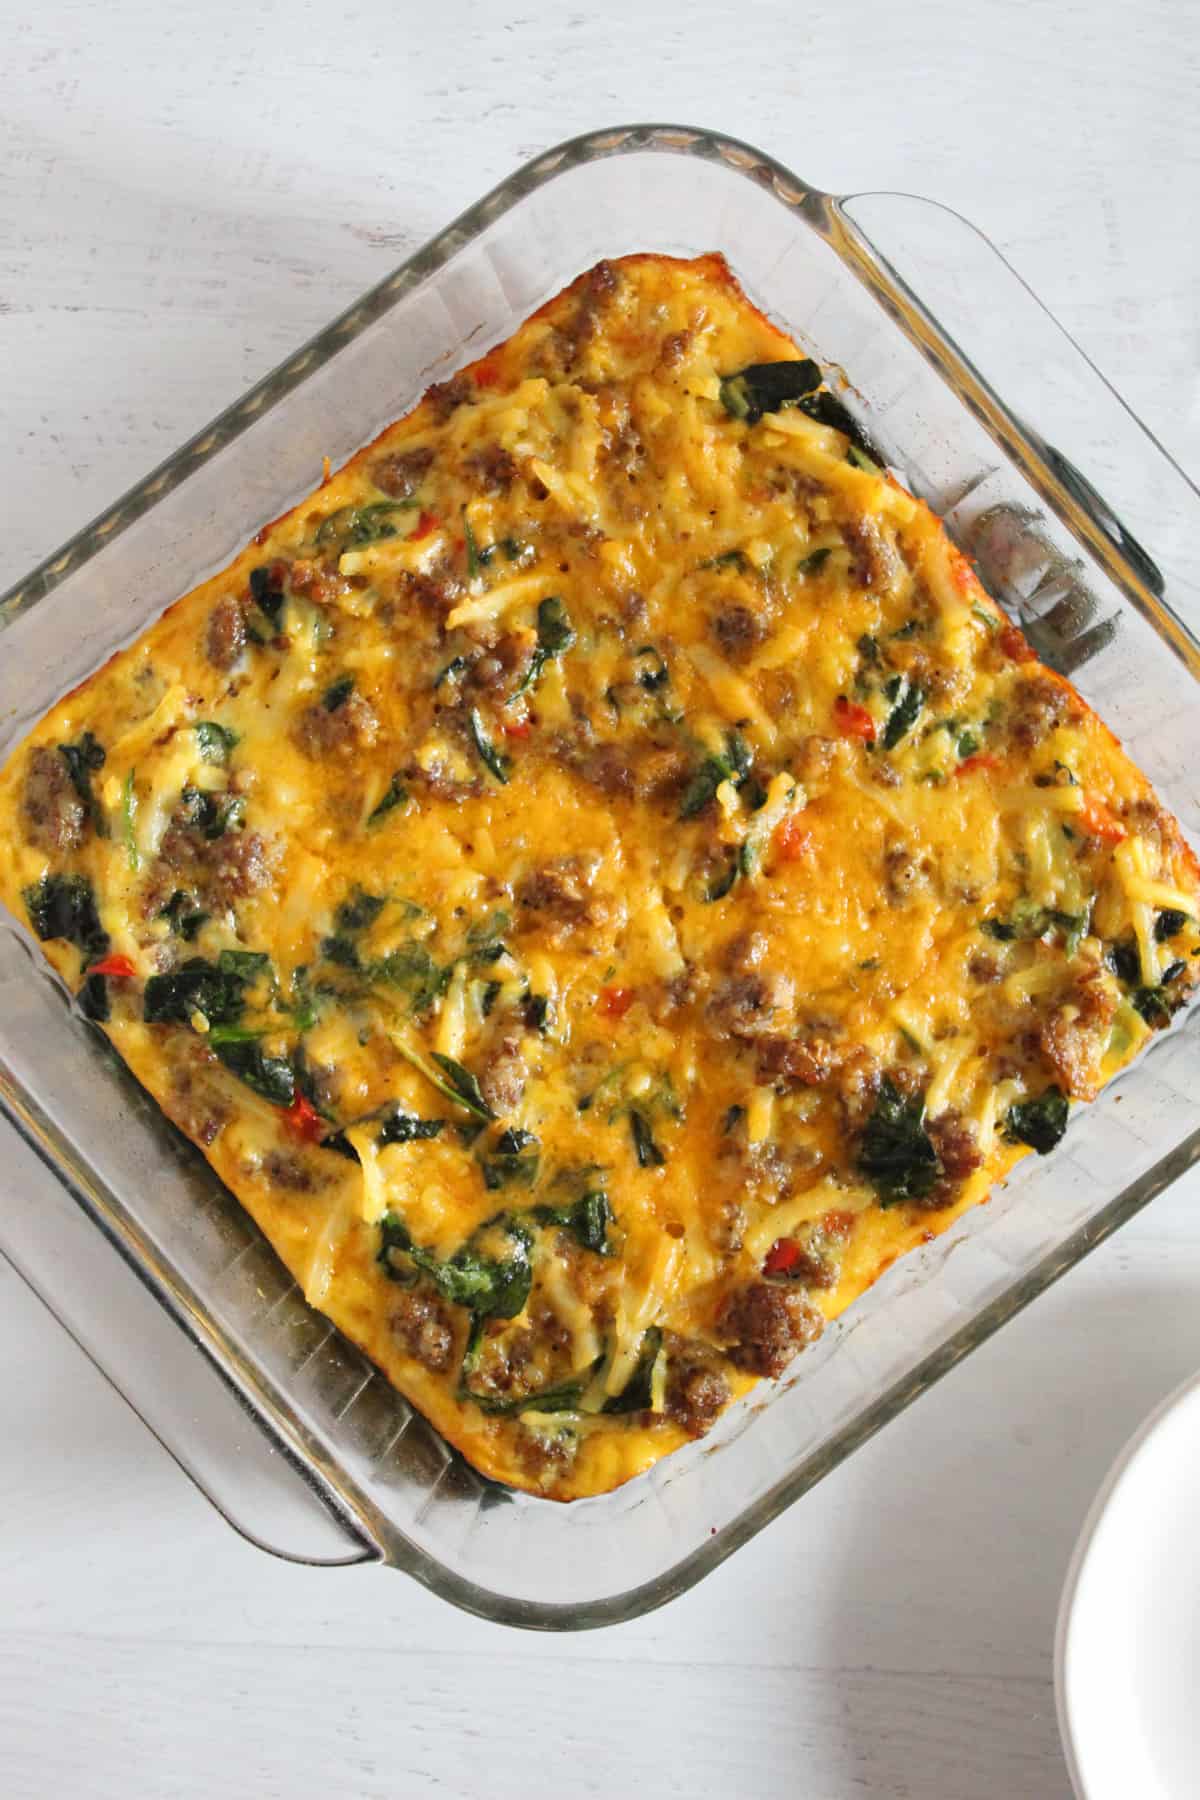 baked egg sausage casserole in a dish.